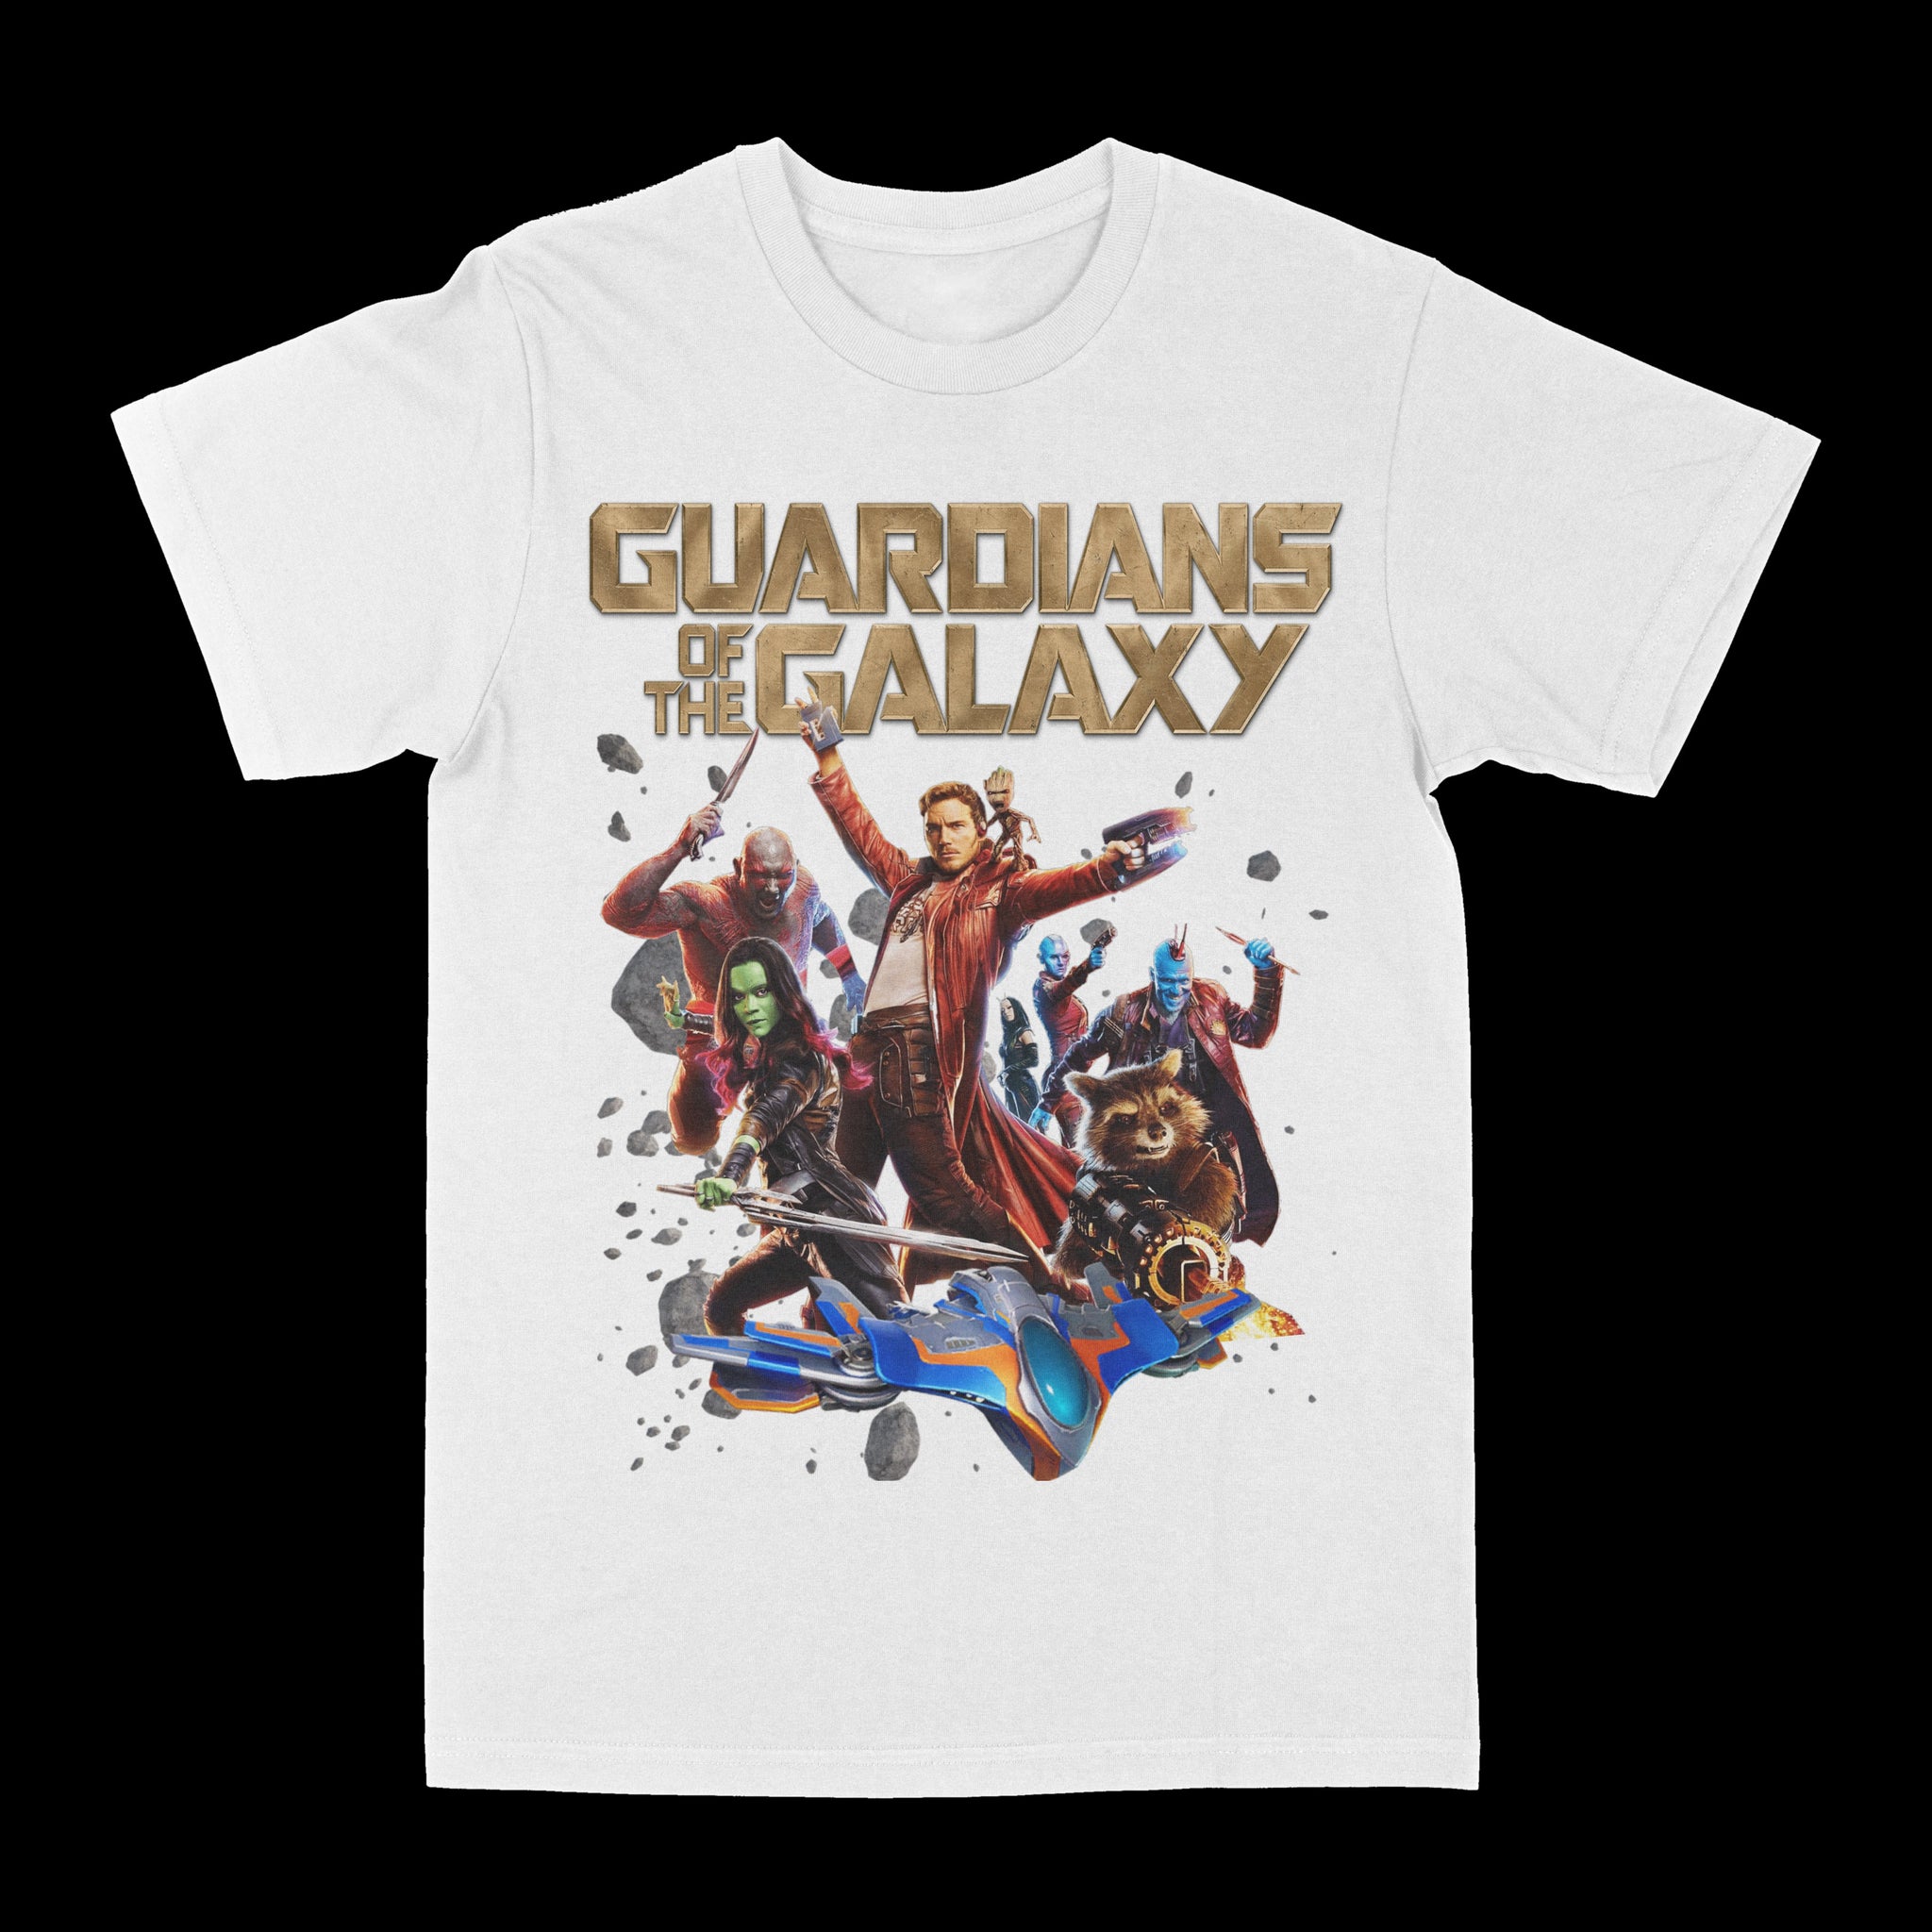 Guardians of the Galaxy Graphic Tee